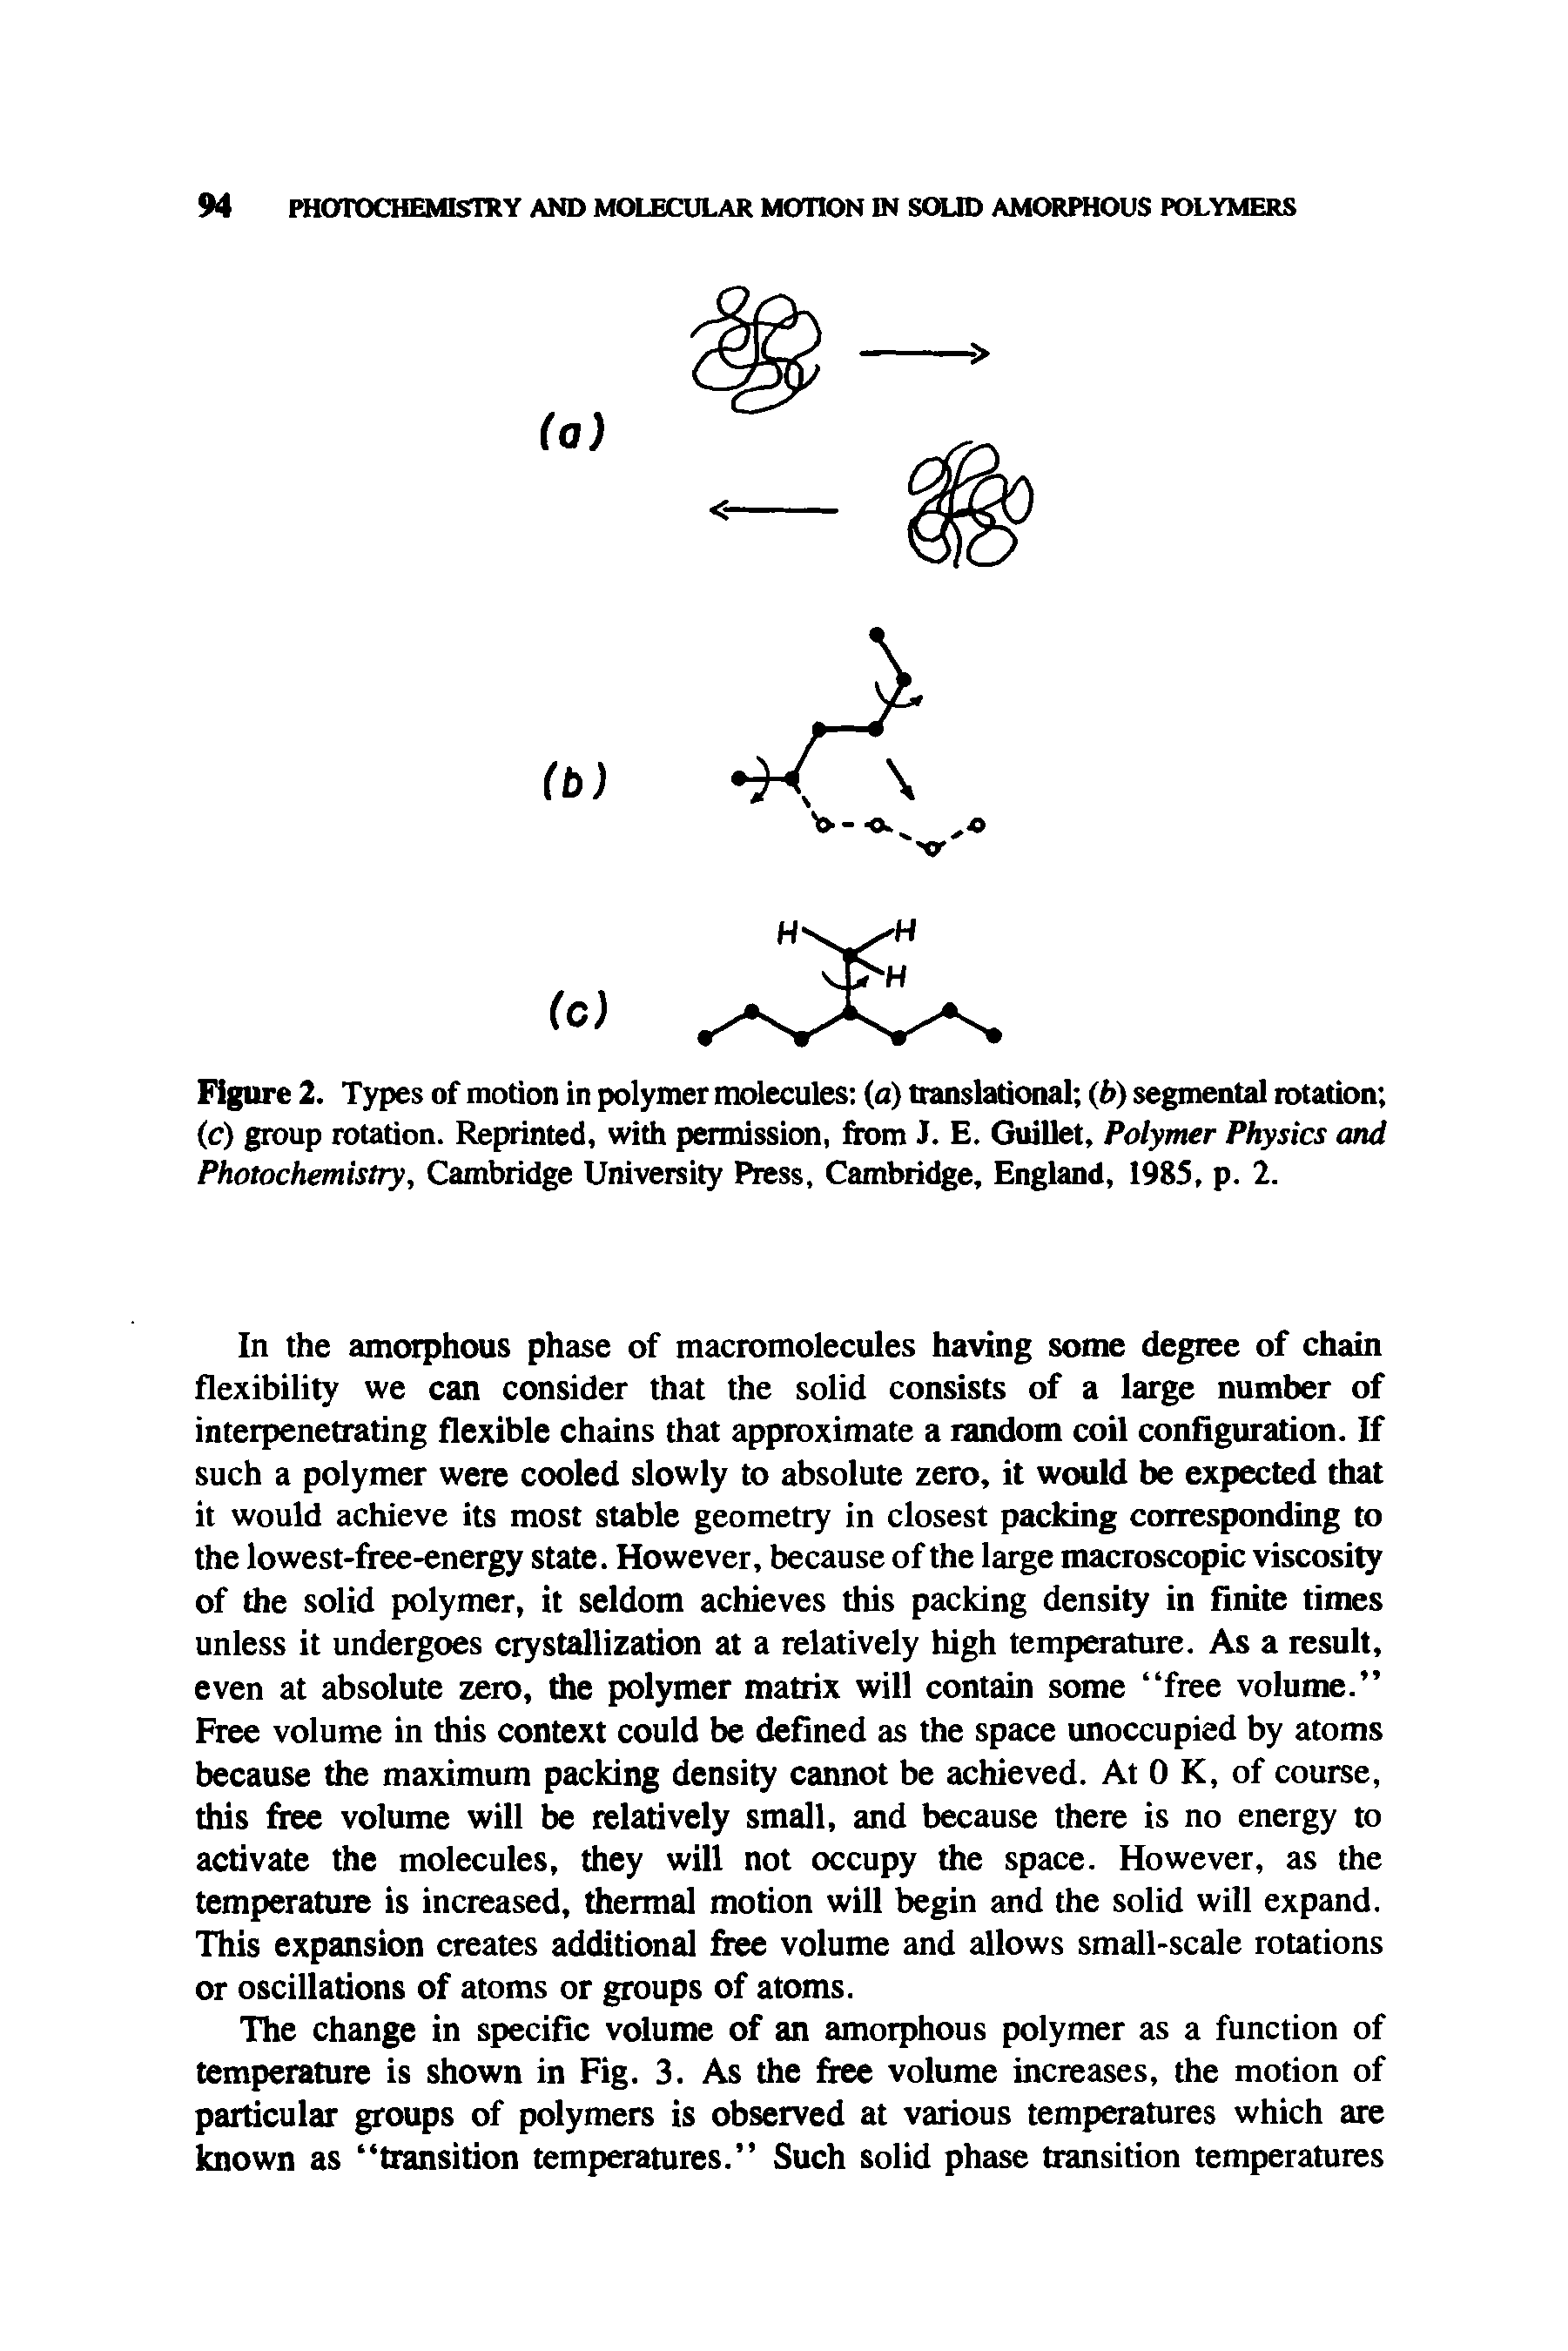 Figure 2. Types of motion in polymer molecules (a) translational (b) segmental rotation (c) group rotation. Reprinted, with permission, from J. E. Guillet, Polymer Physics and Photochemistry, Cambridge University Press, Cambridge, England, 1985, p. 2.